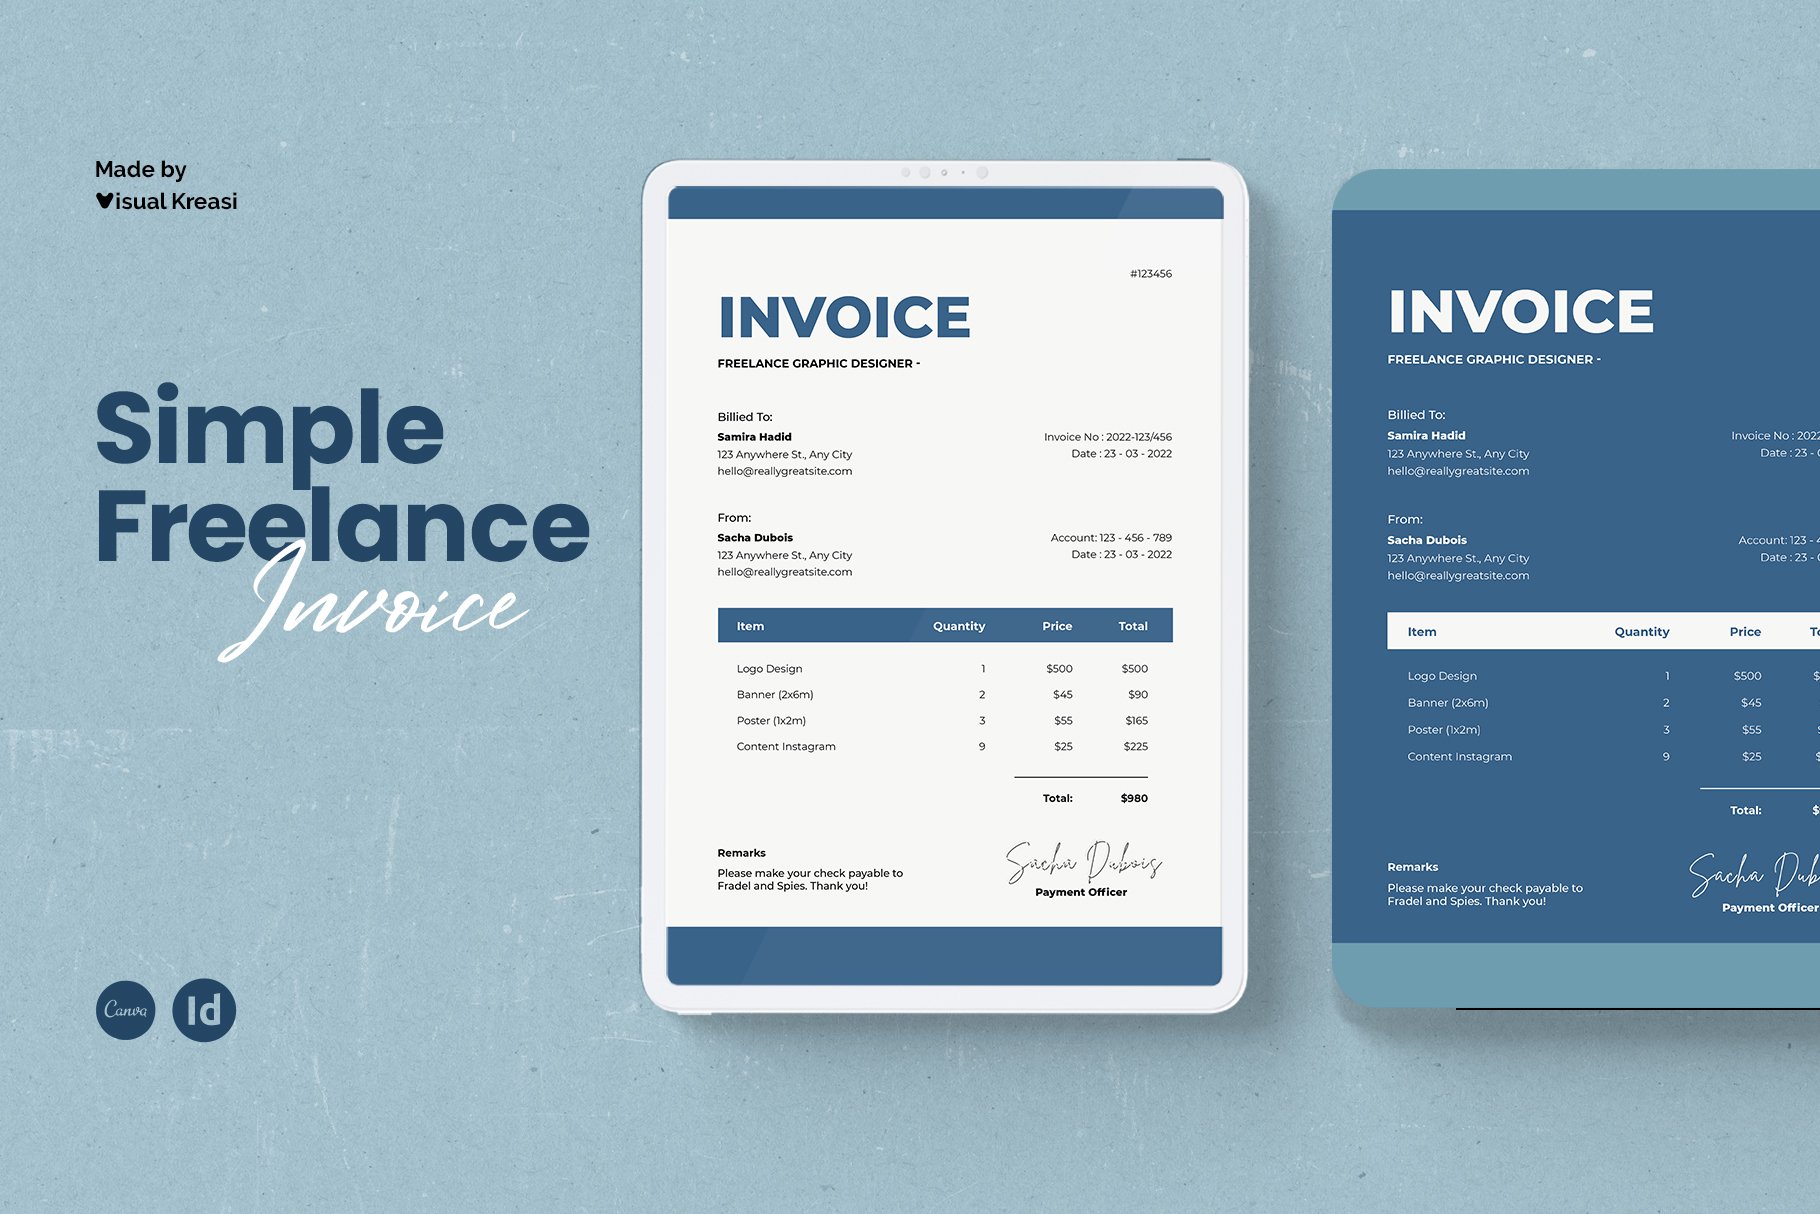 Simple Freelance Invoice cover image.